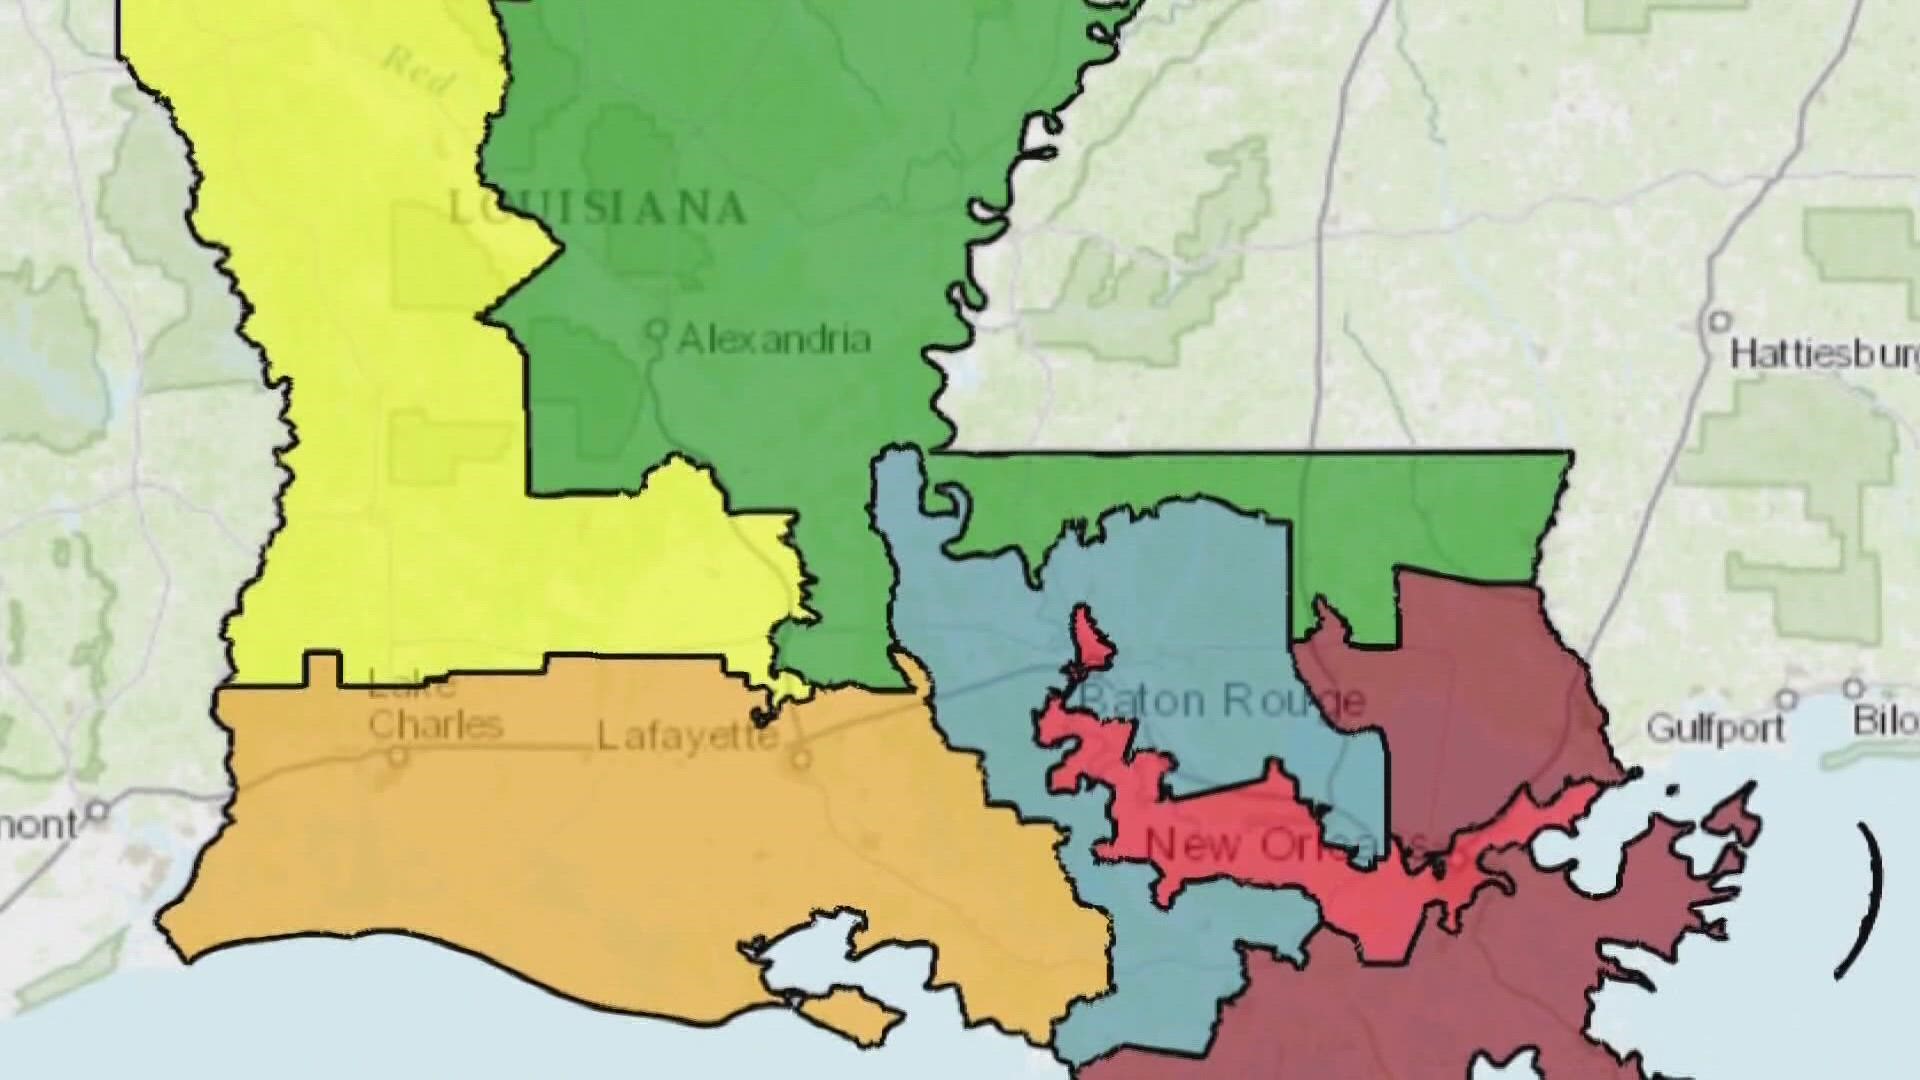 Louisiana Middle District U.S. Judge Shelly Dick said she’d redraw the map herself if the Louisiana legislature wouldn’t – now it looks like she’ll have to.